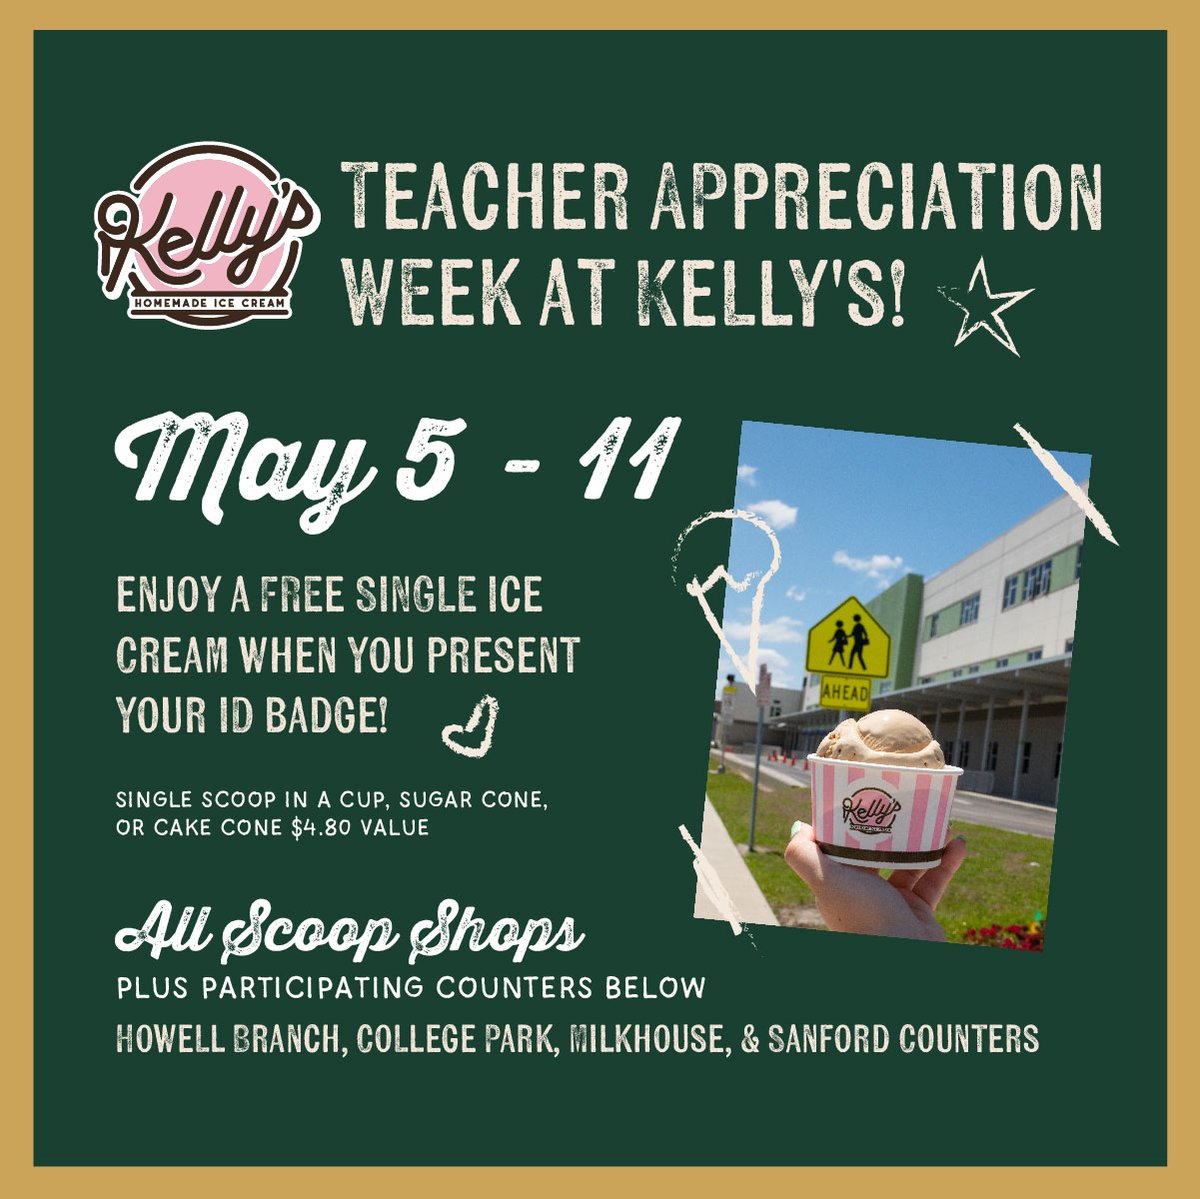 Join Kelly's Homemade Ice Cream to celebrate #TeacherAppreciationWeek from May 5 to May 11! Present your ID badge during this special week and savor a complimentary single scoop of our delicious ice cream as our token of gratitude.

#WOChamber #westorange #Leadership #Community